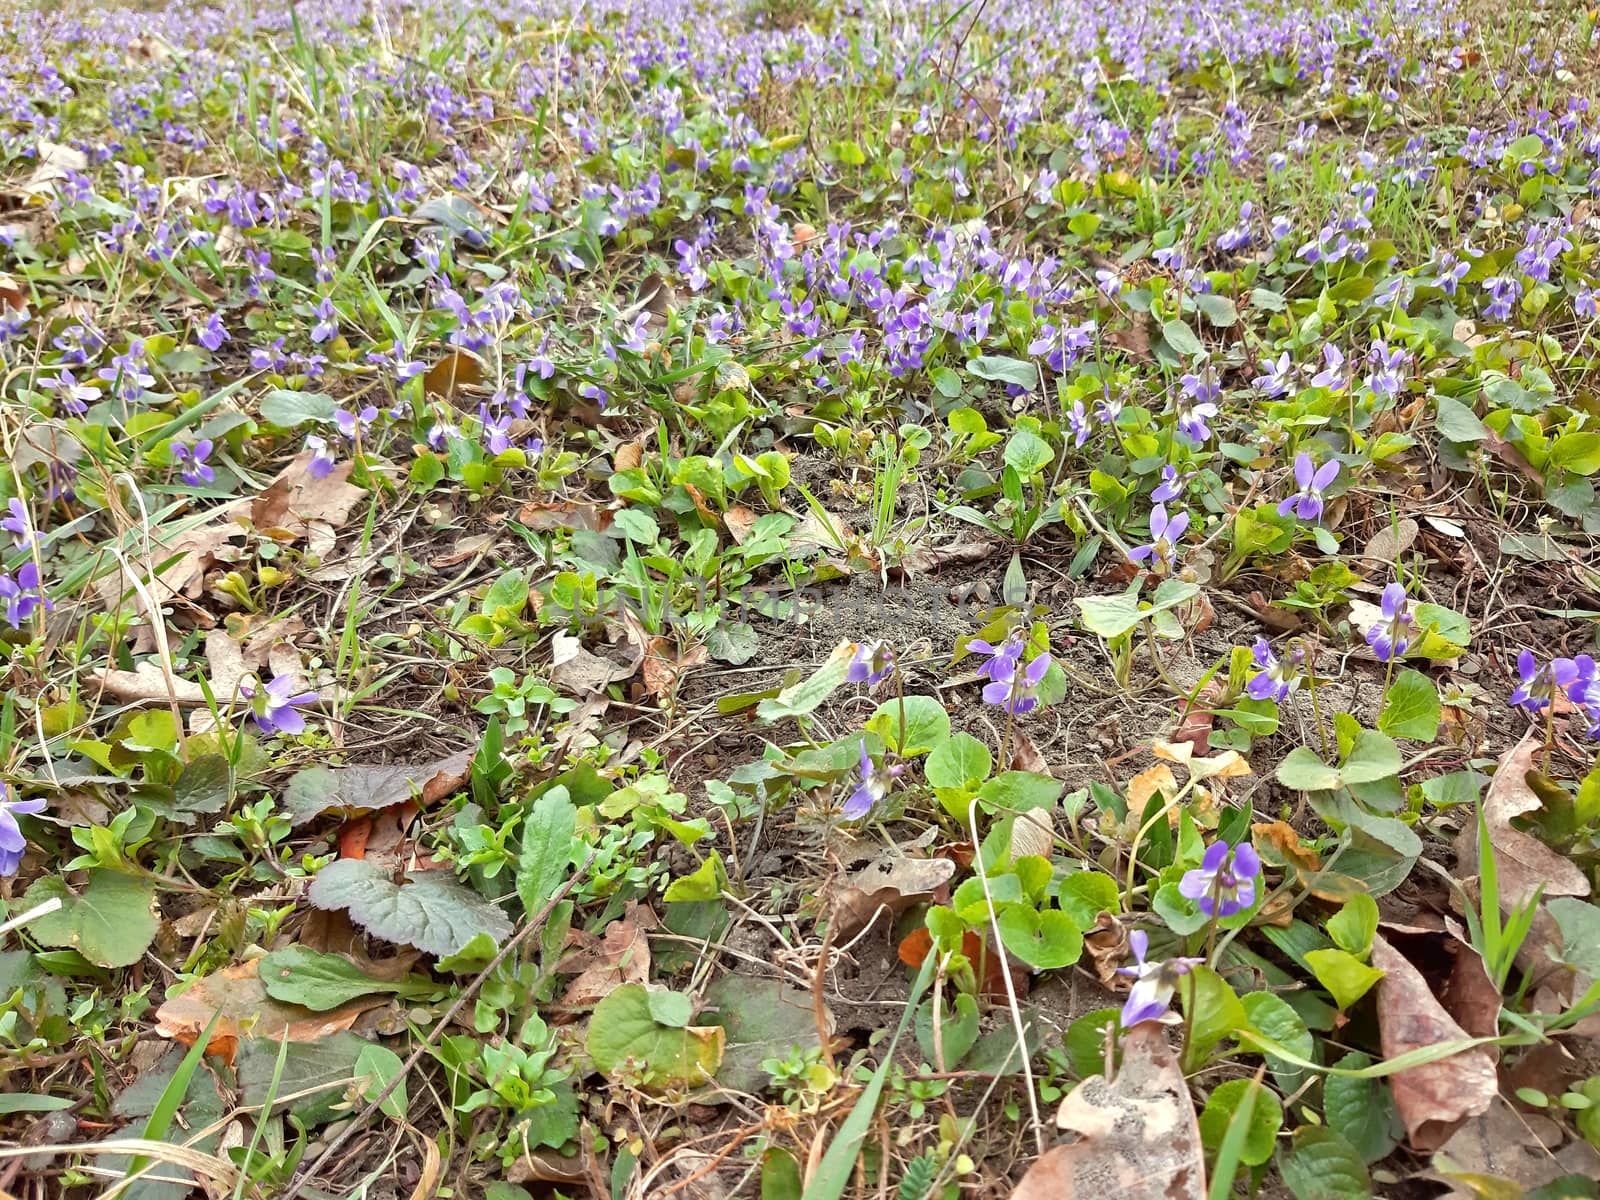 Carpet of violets blooming in the spring and with a strong smell by Mindru